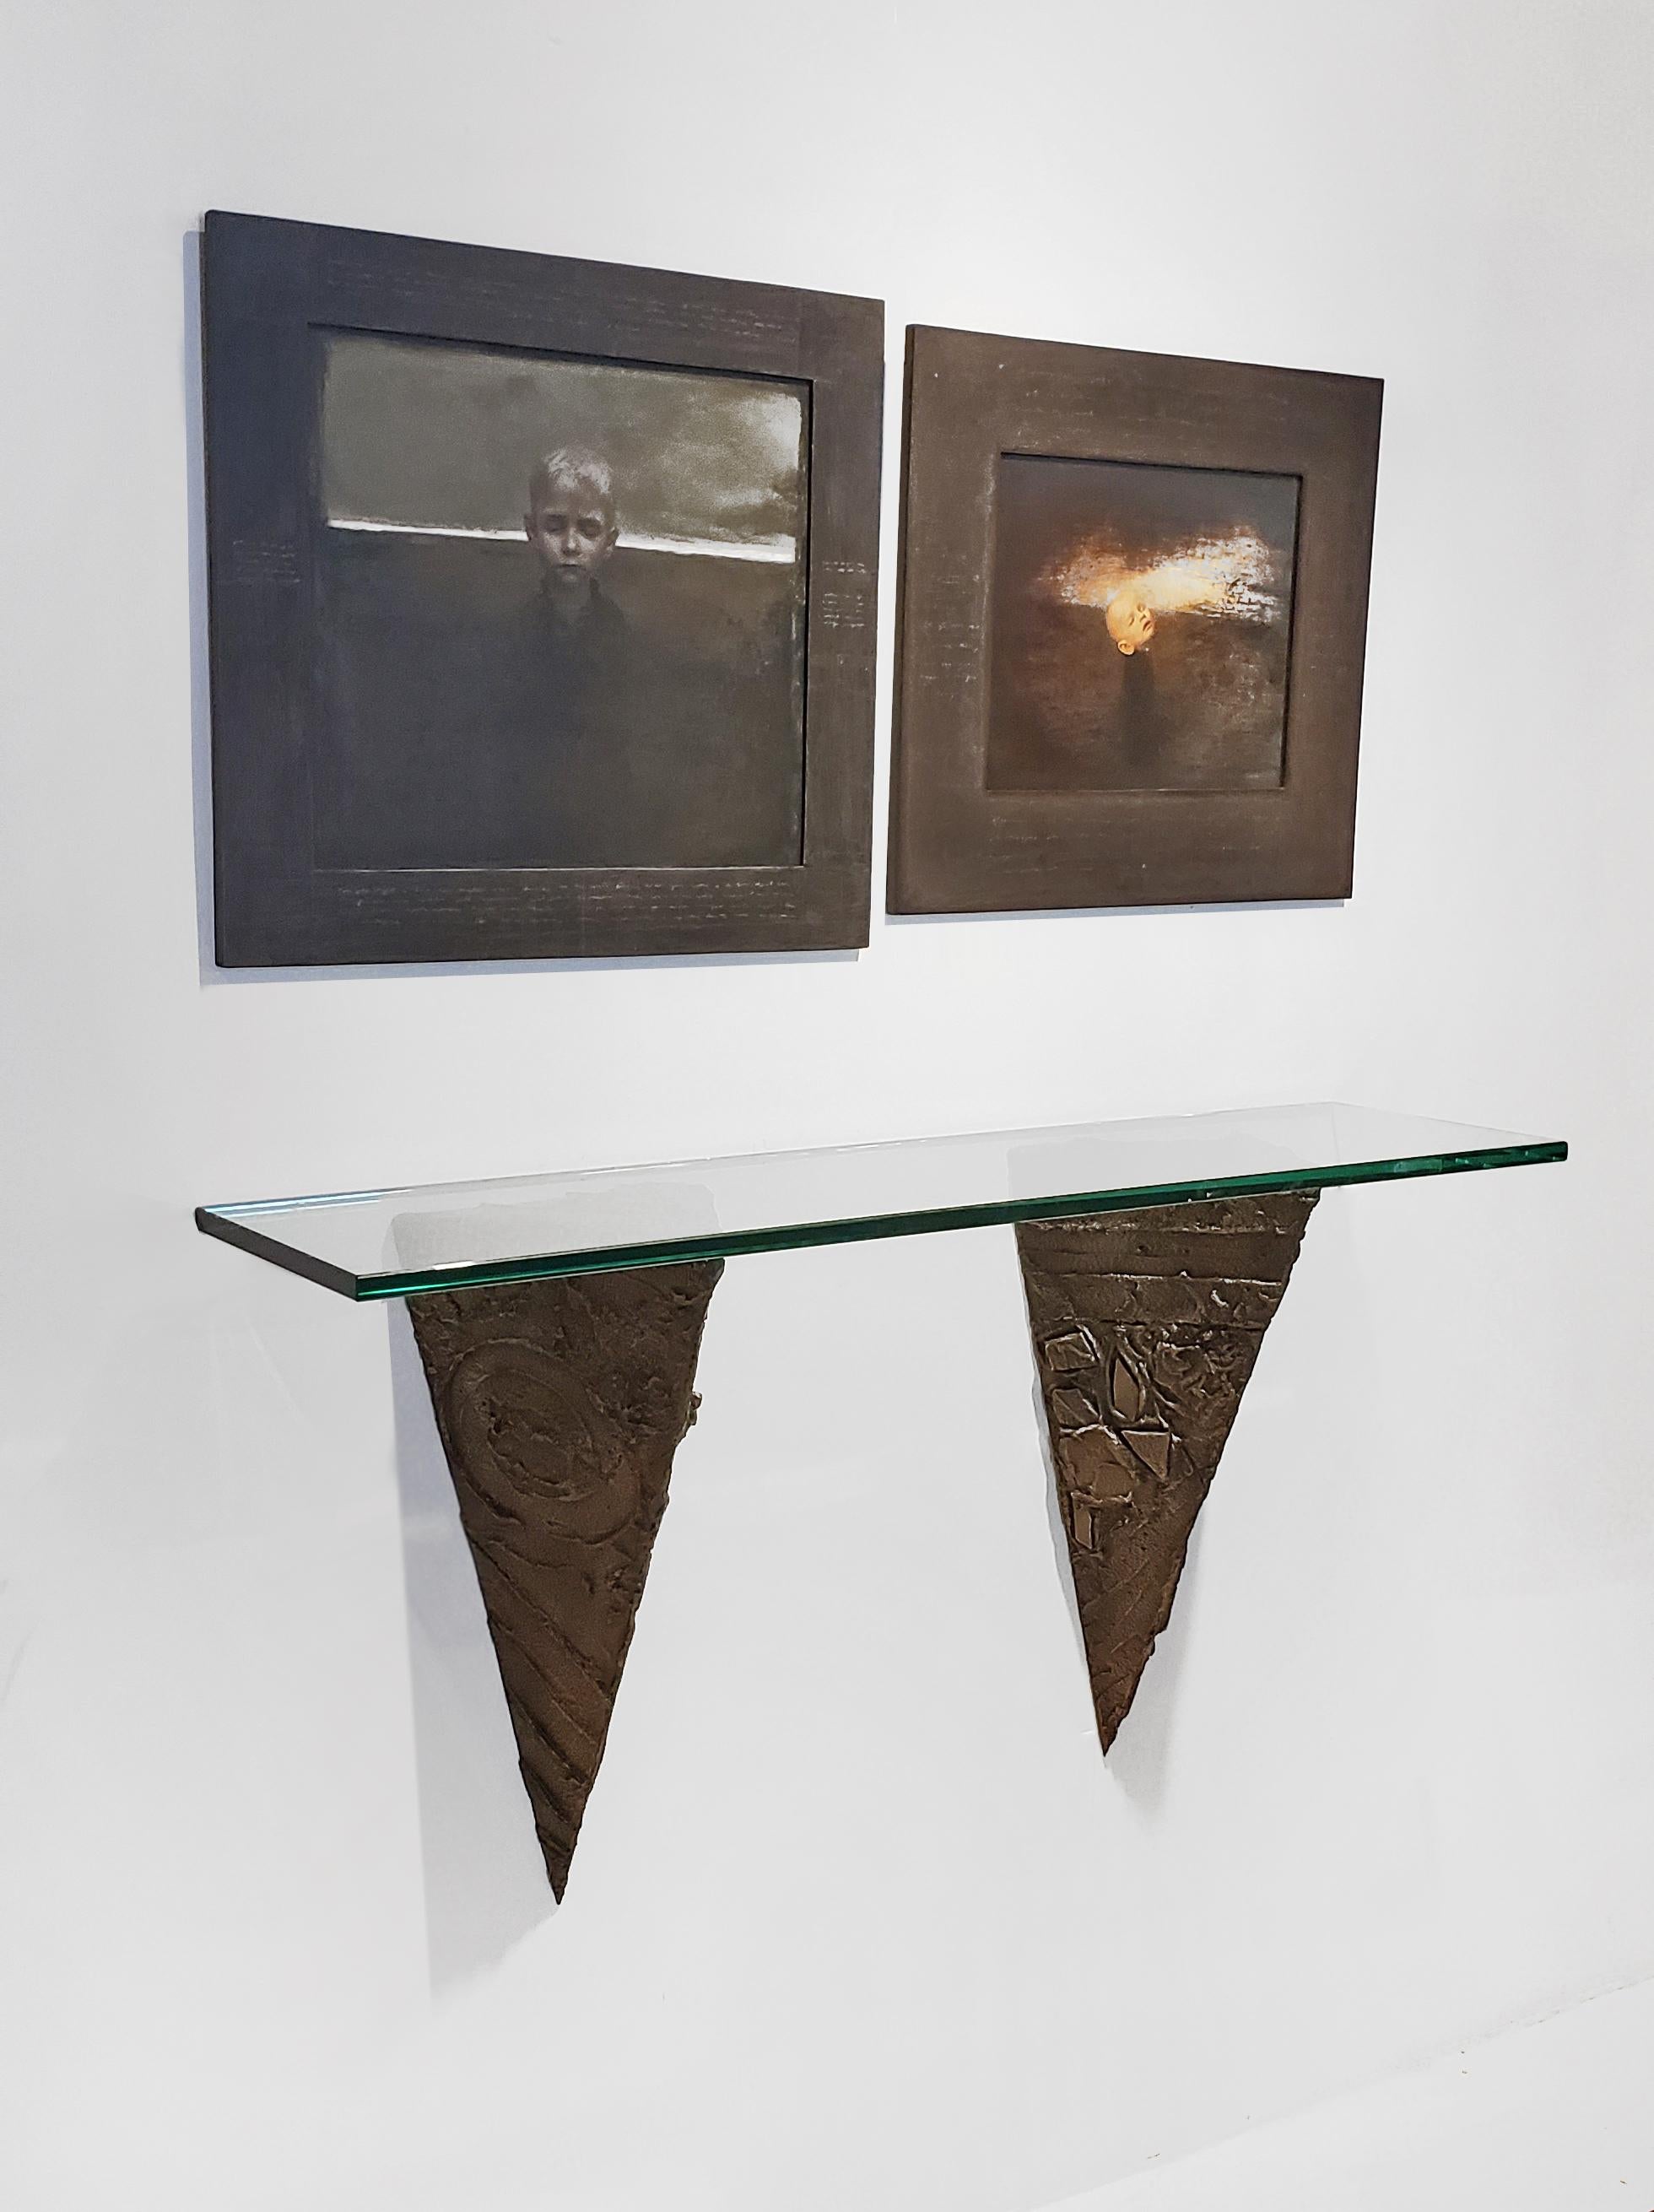 1960s sculpted bronze wall mount console designed by Paul Evans and produced by Directional. New glass top. Original wall mount brackets.